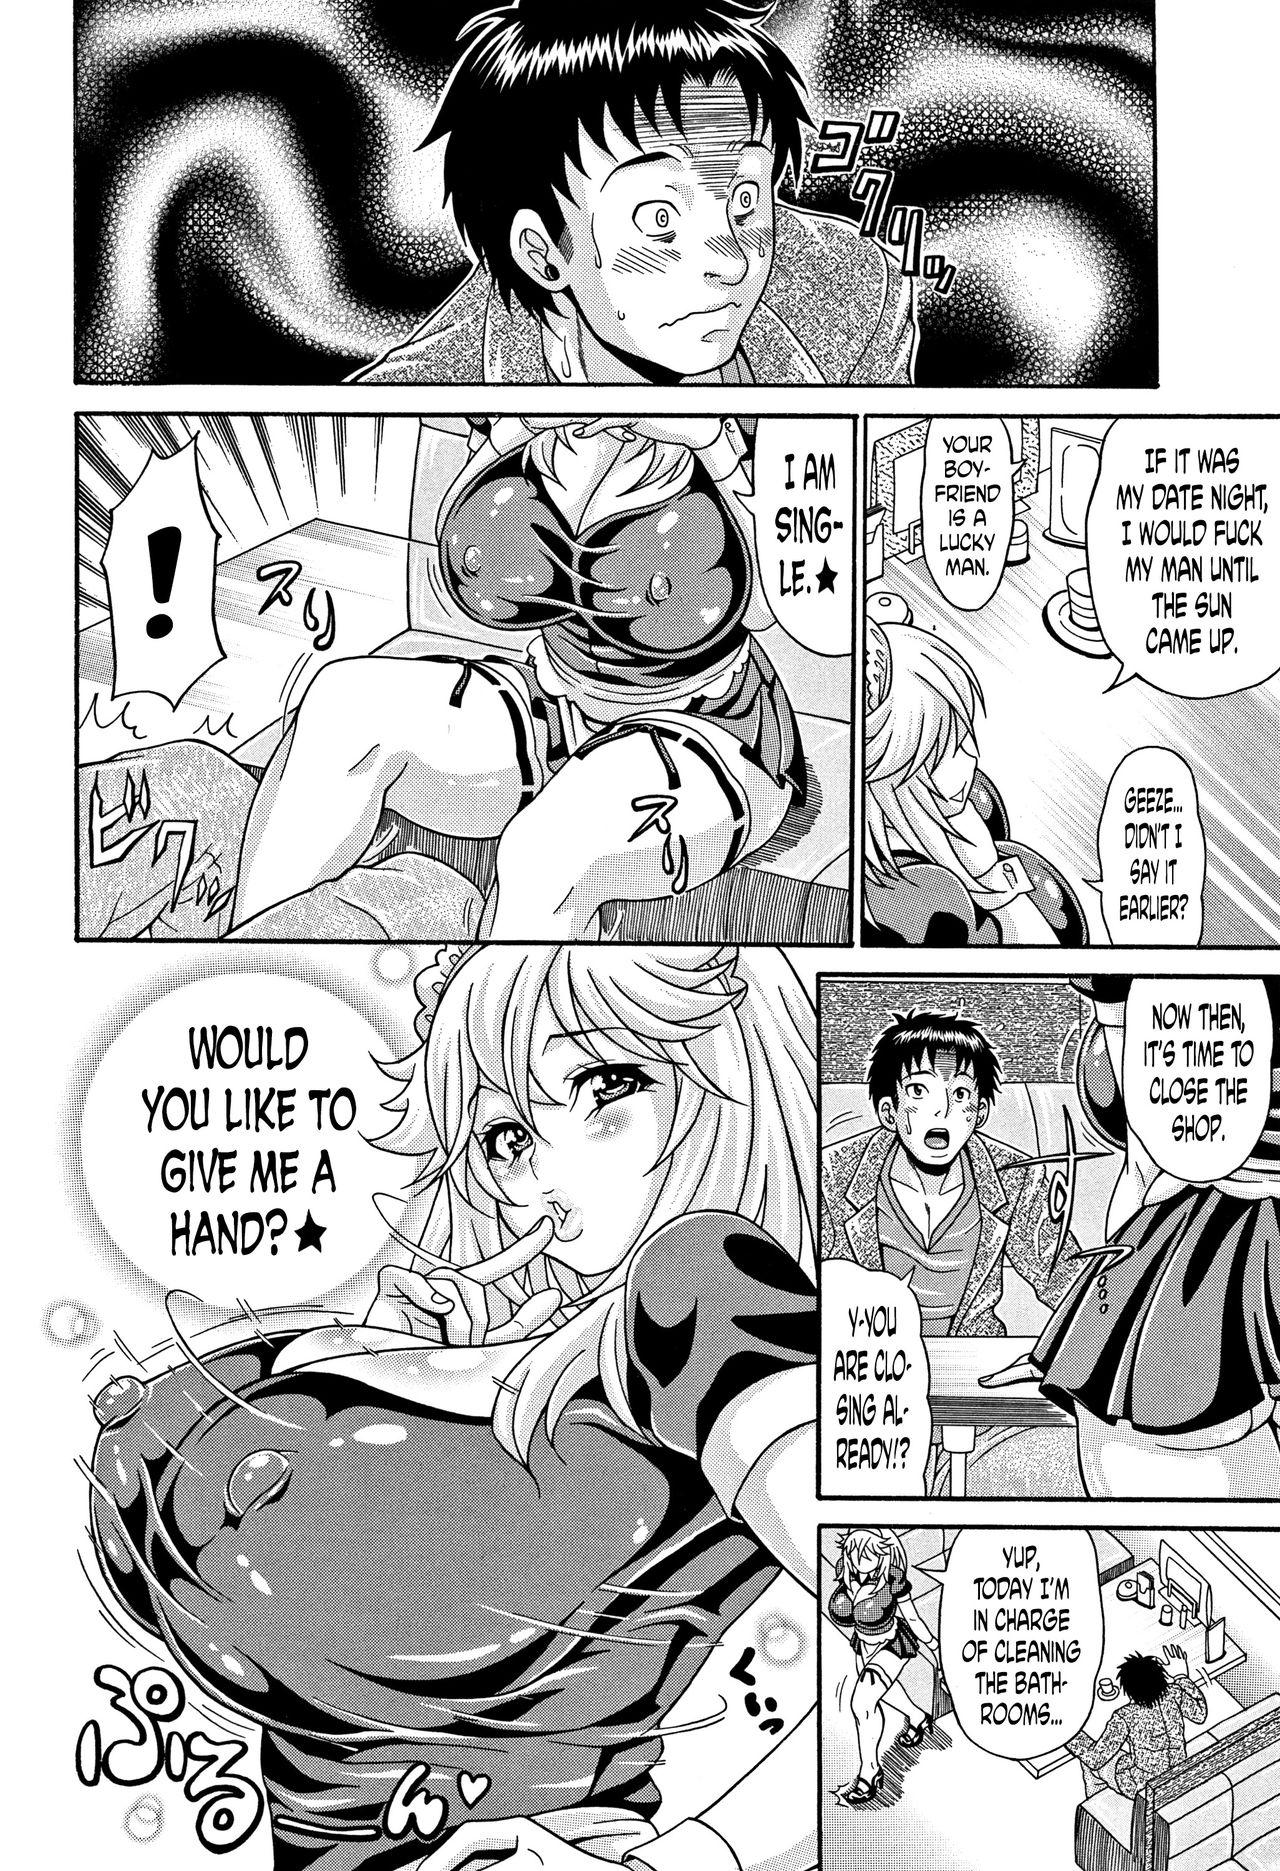 [Andou Hiroyuki] Mamire Chichi - Sticky Tits Feel Hot All Over. Ch.1-6 [English] [doujin-moe.us] 77